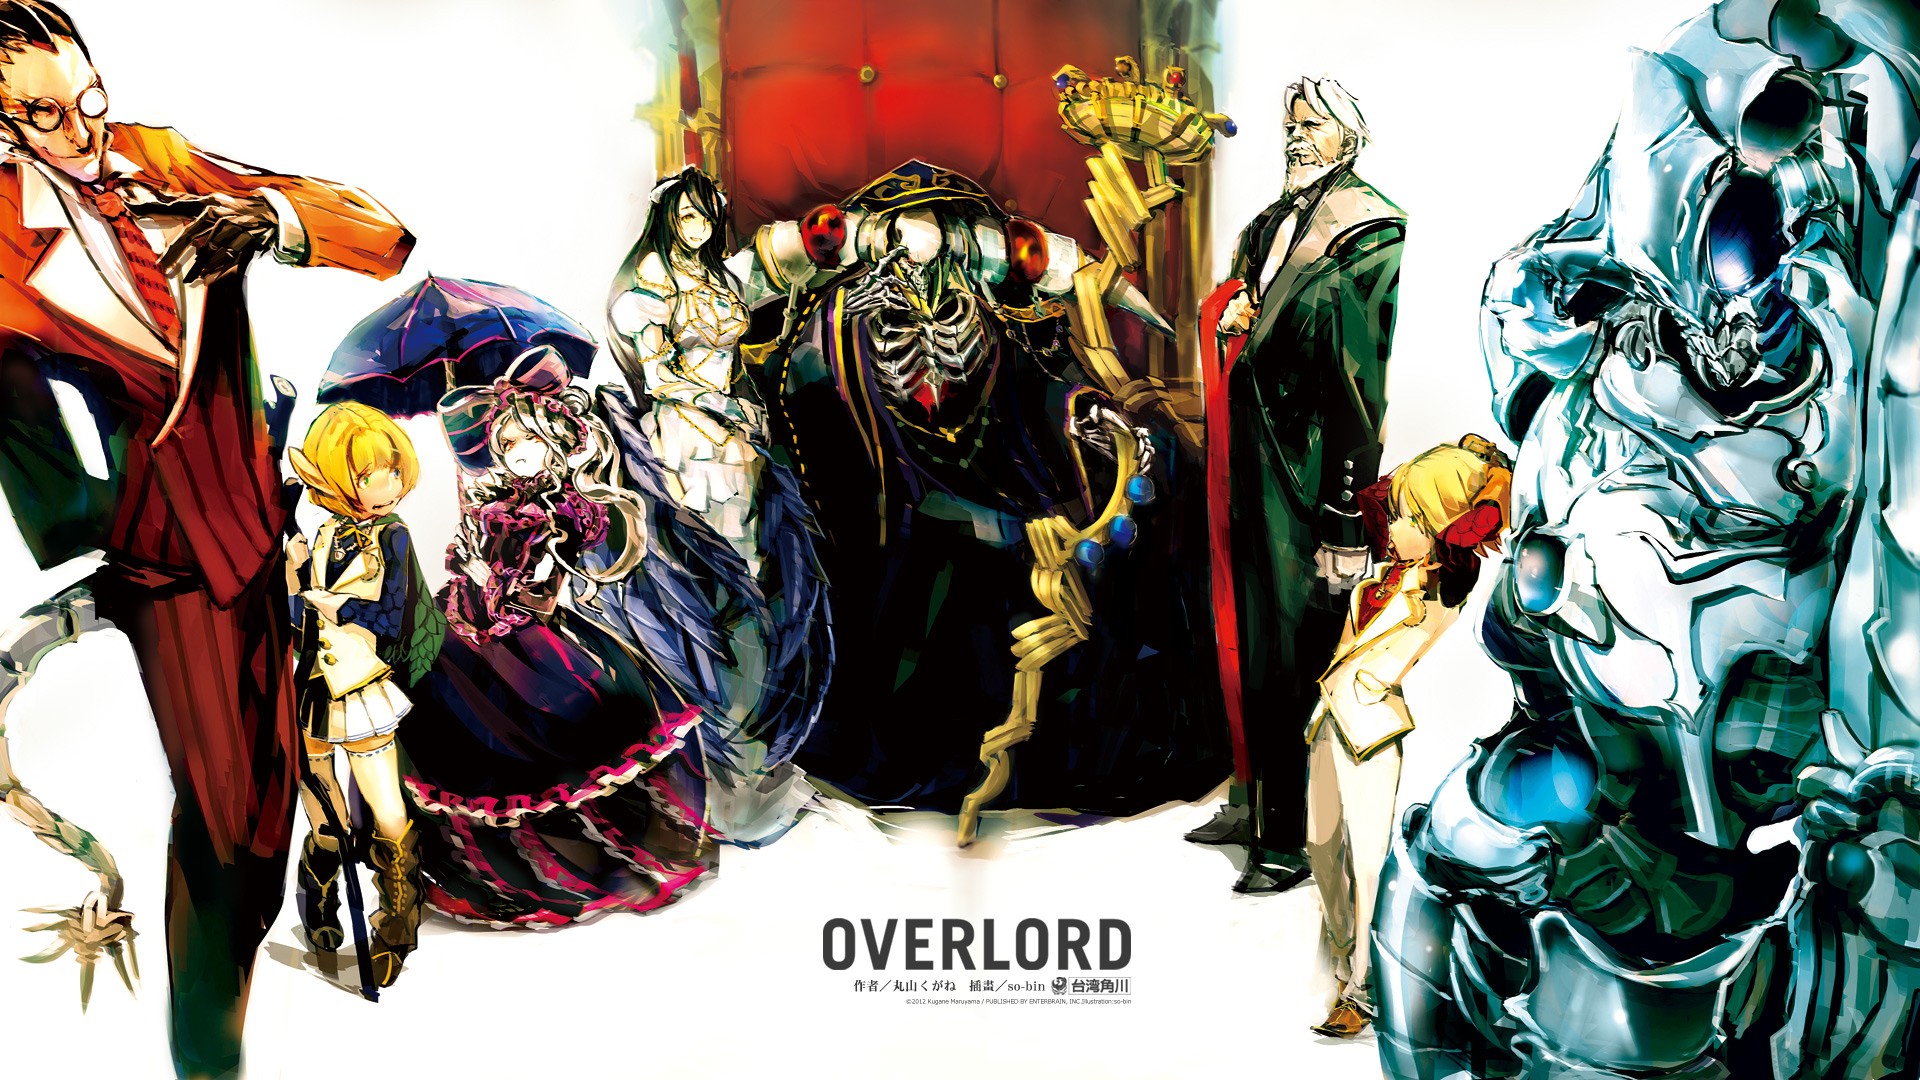 Overlord Anime Ainz Ooal Gown Albedo Overlord Demiurge Overlord Cocytus Overlord Aura Bella Fiora Overlord Mare Bello Fiore Overlord Shalltear 19x1080 Wallpaper Wallhaven Cc